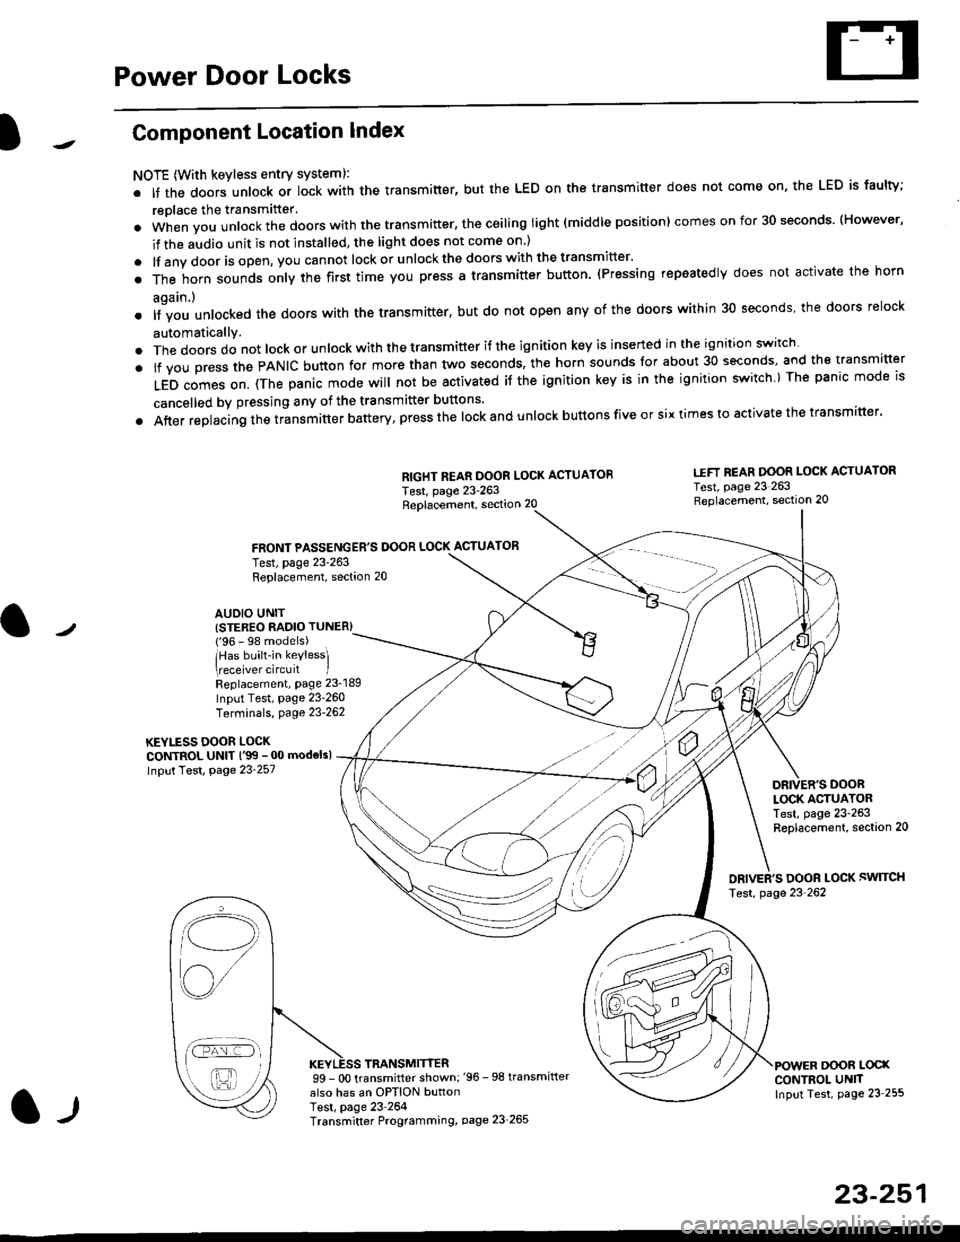 HONDA CIVIC 2000 6.G Workshop Manual Power Door Locks
Component Location Index
NOTE (With keyless entry systeml:
. It the doors unlock or lock with the transmitter, but the LED on the transmitter does not come on, the LED is faulty;
repl